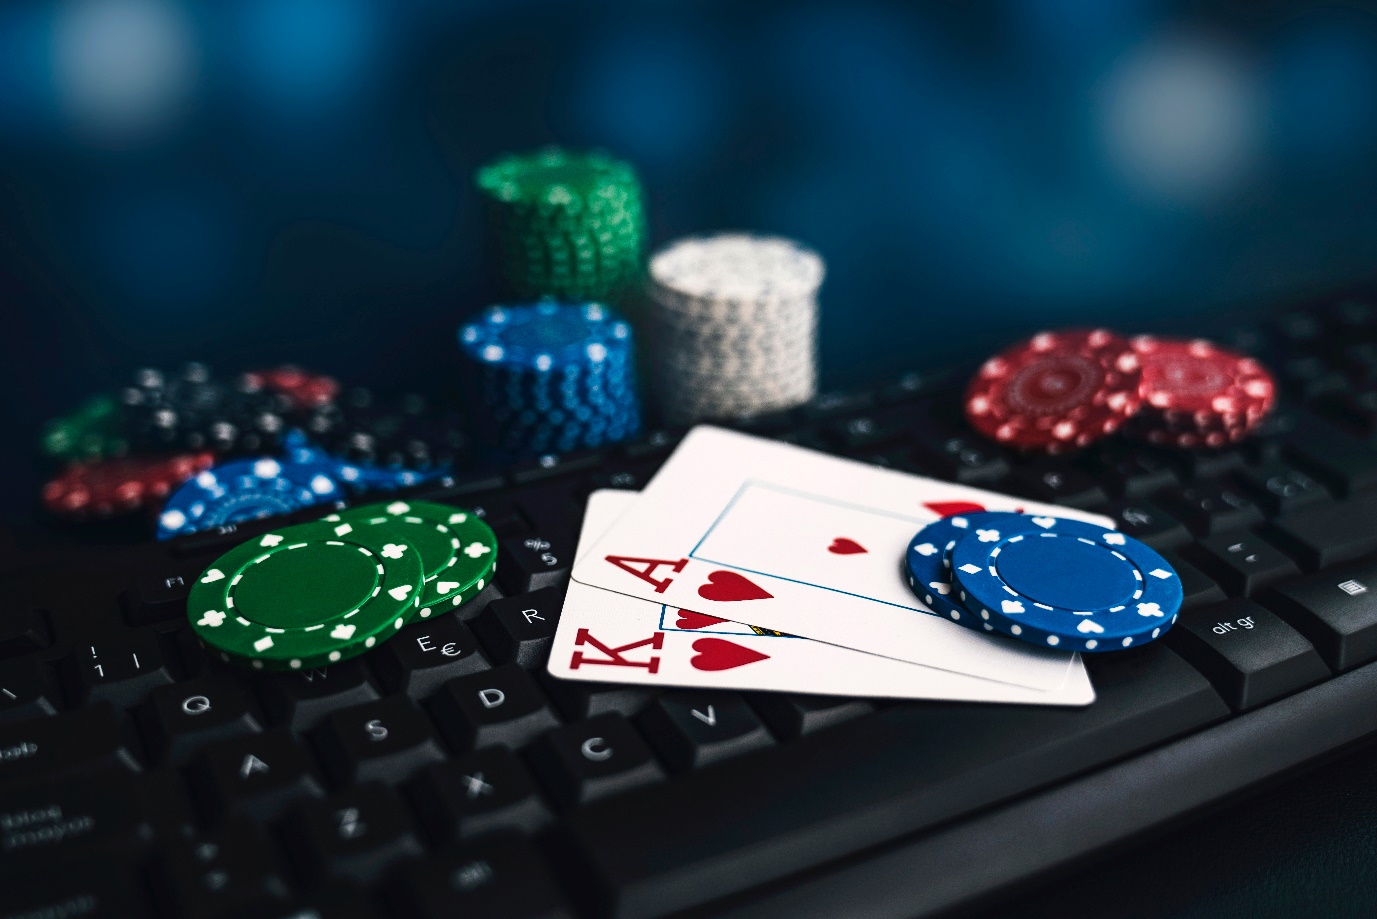 What do you want to know about live Blackjack?